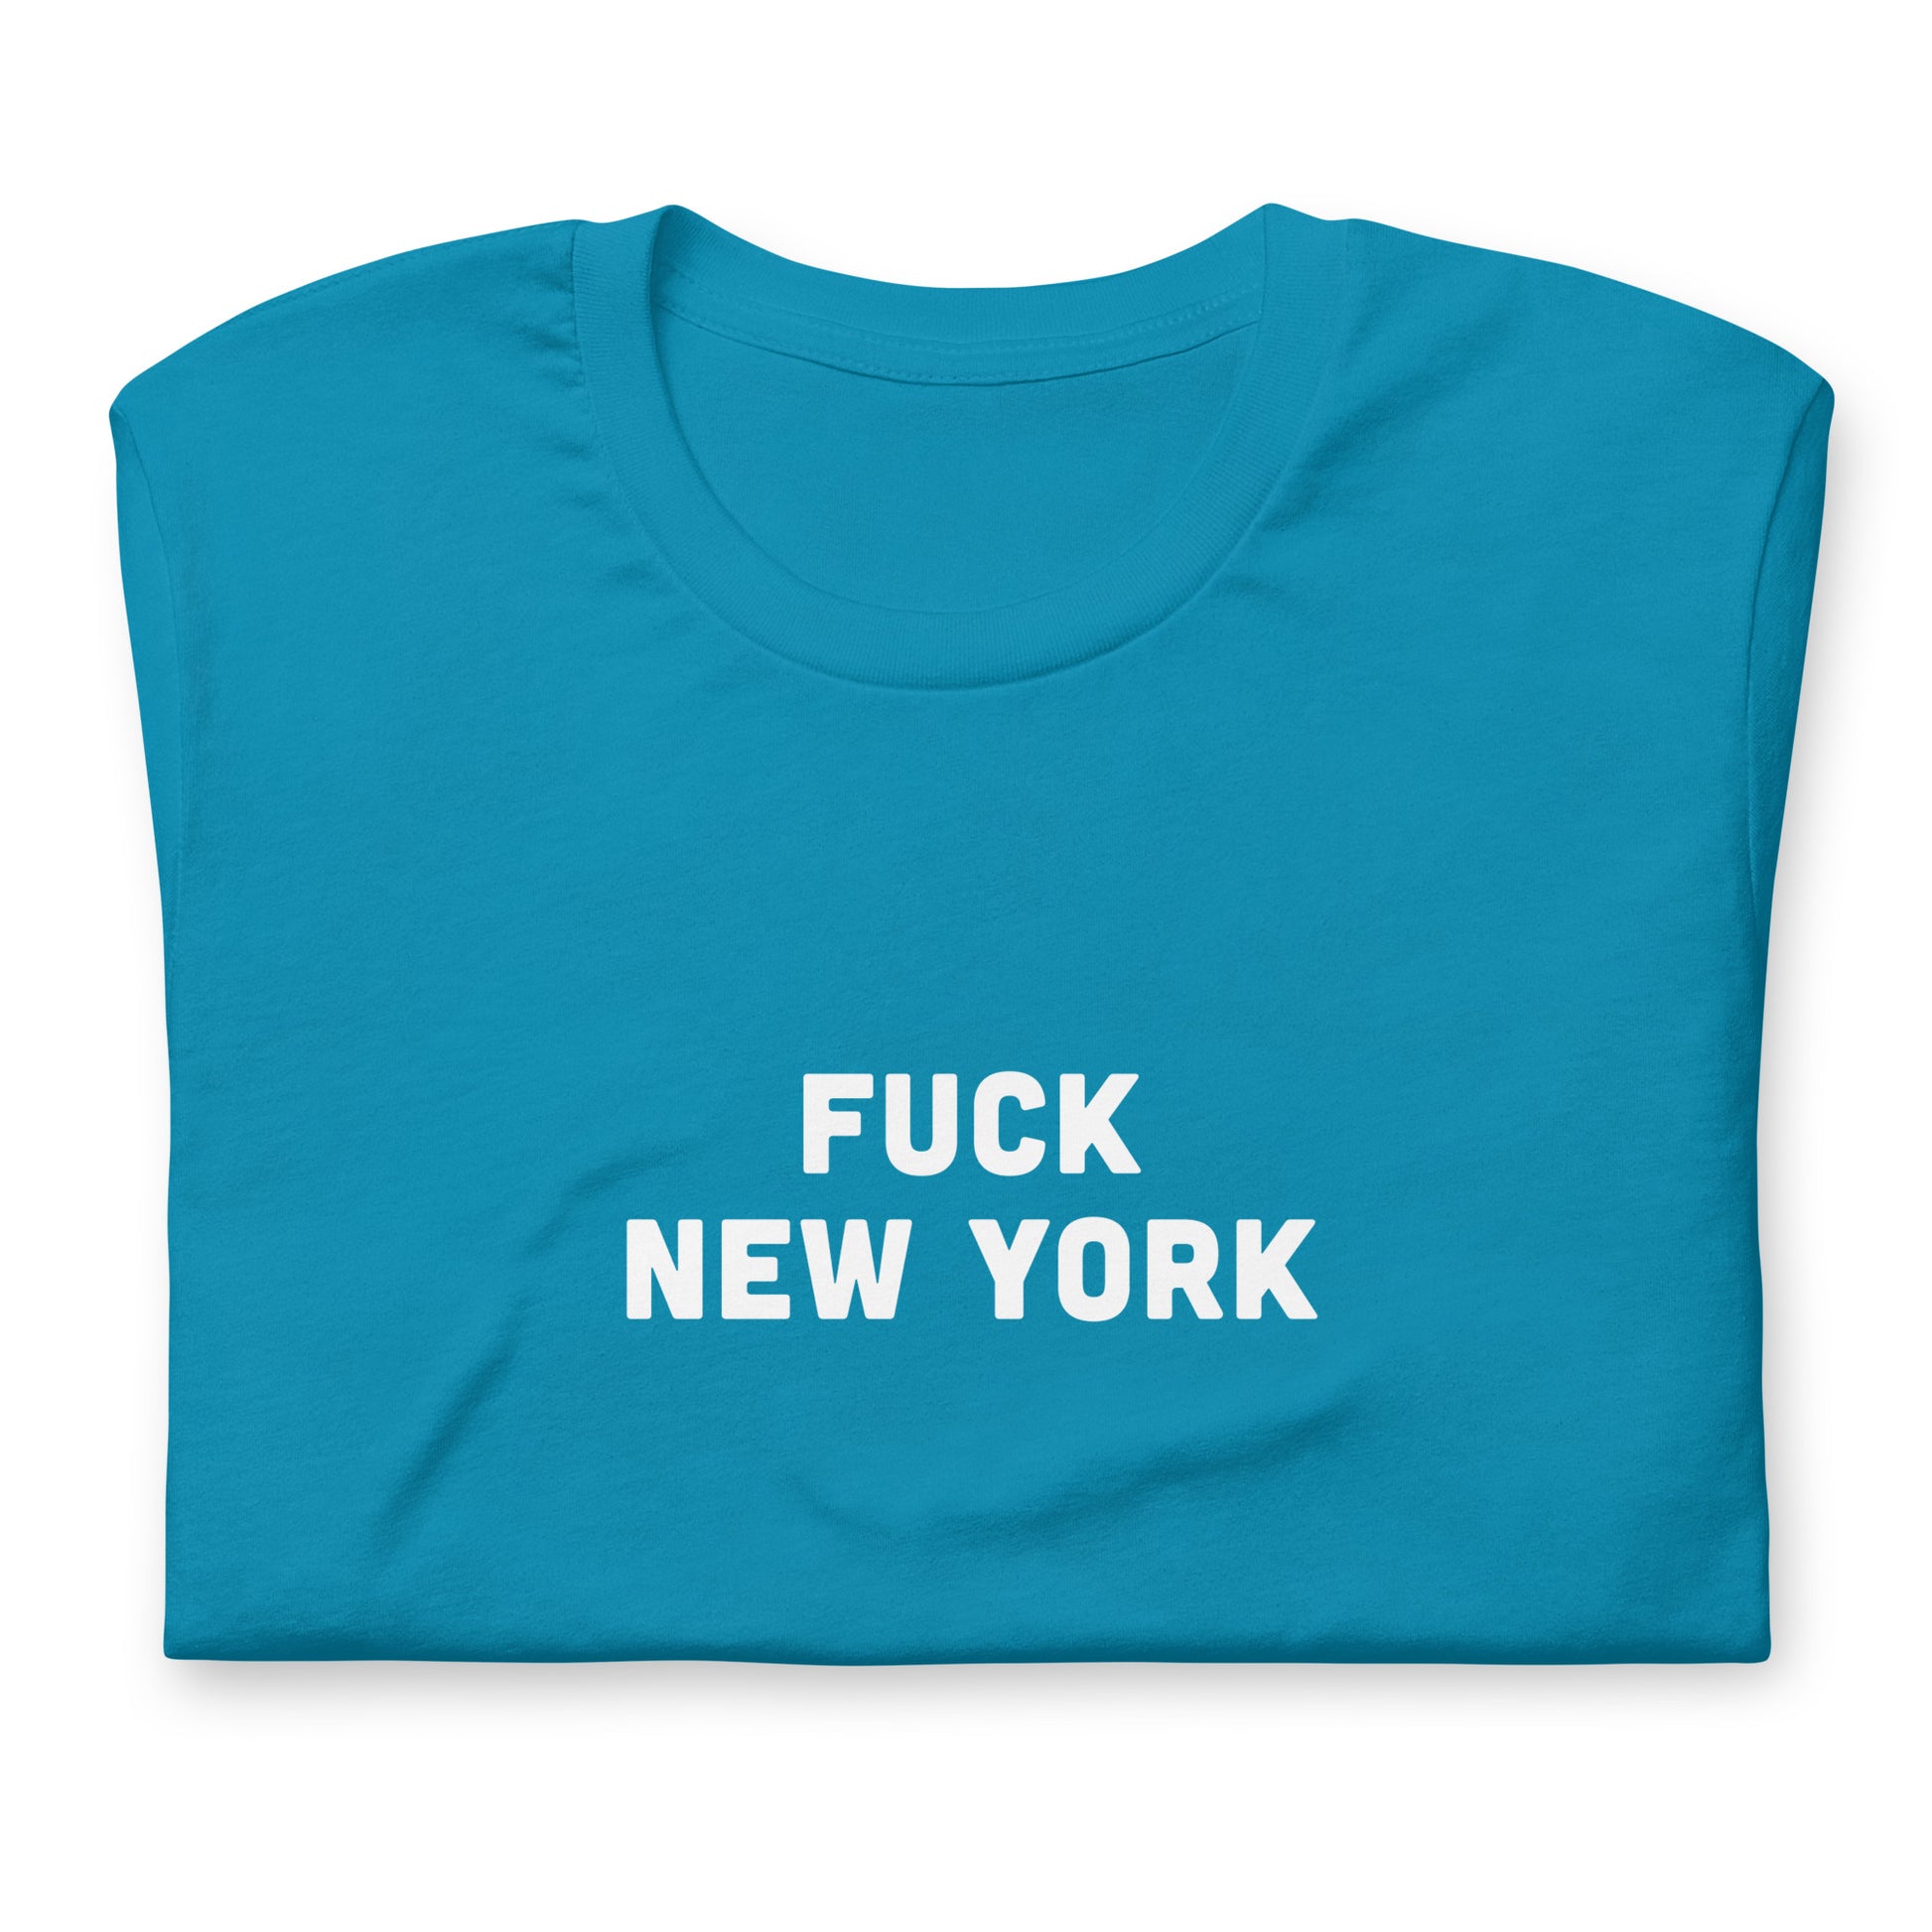 Fuck New York T-Shirt Size M Color Navy